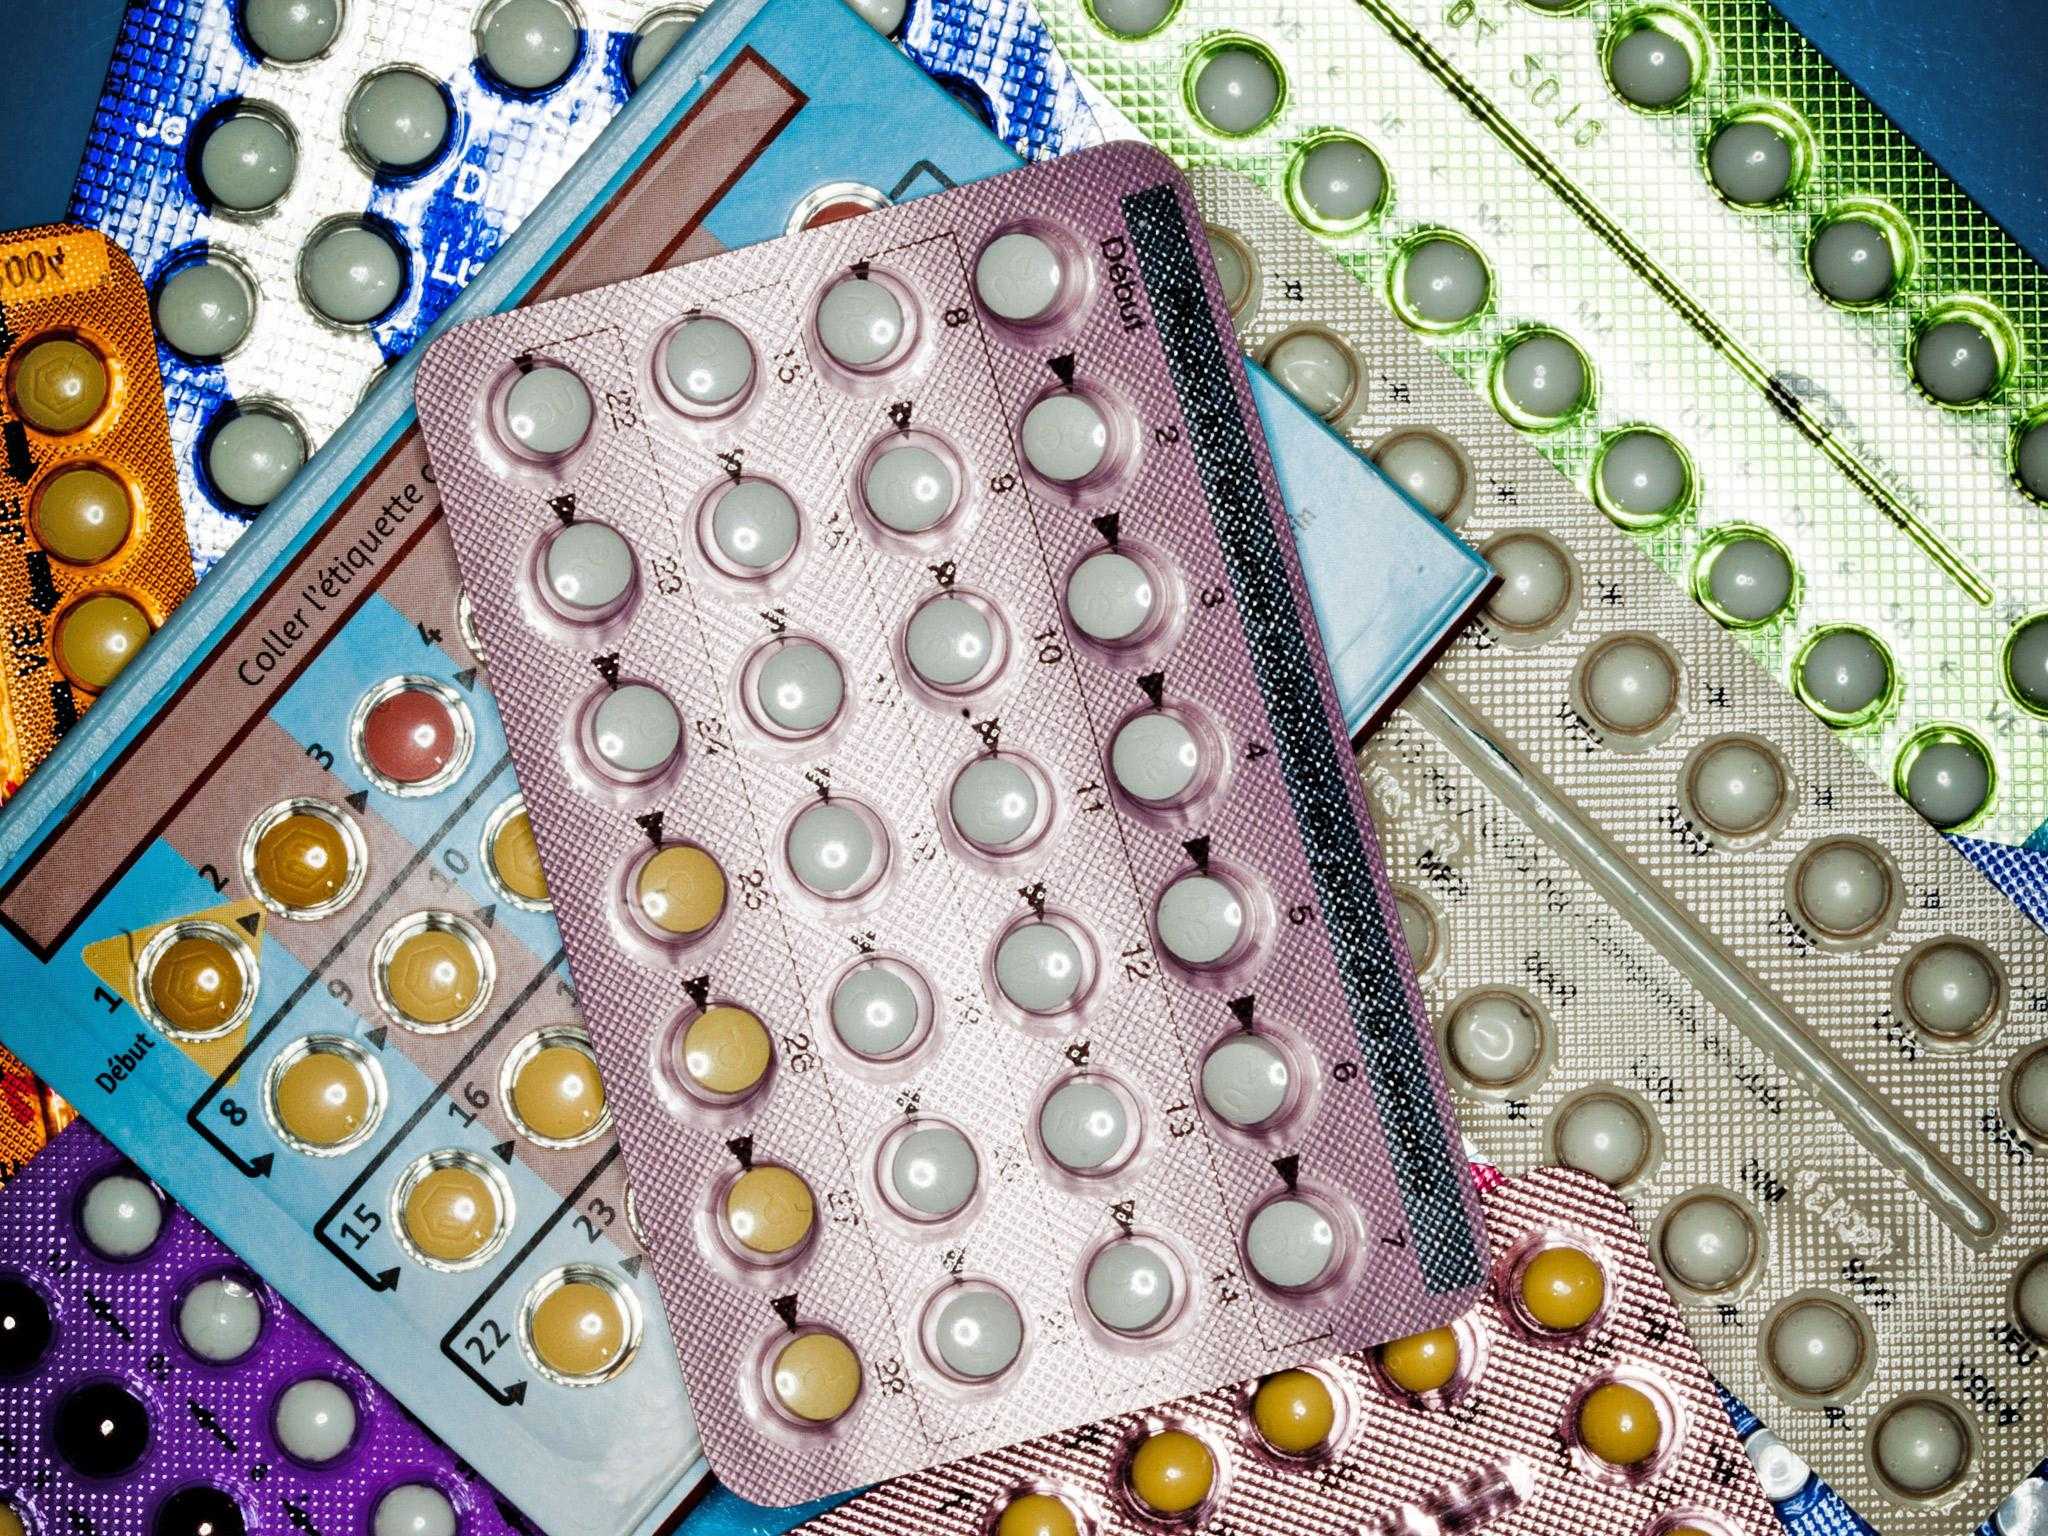 MOH warns against use of banned Chinese contraceptive pill